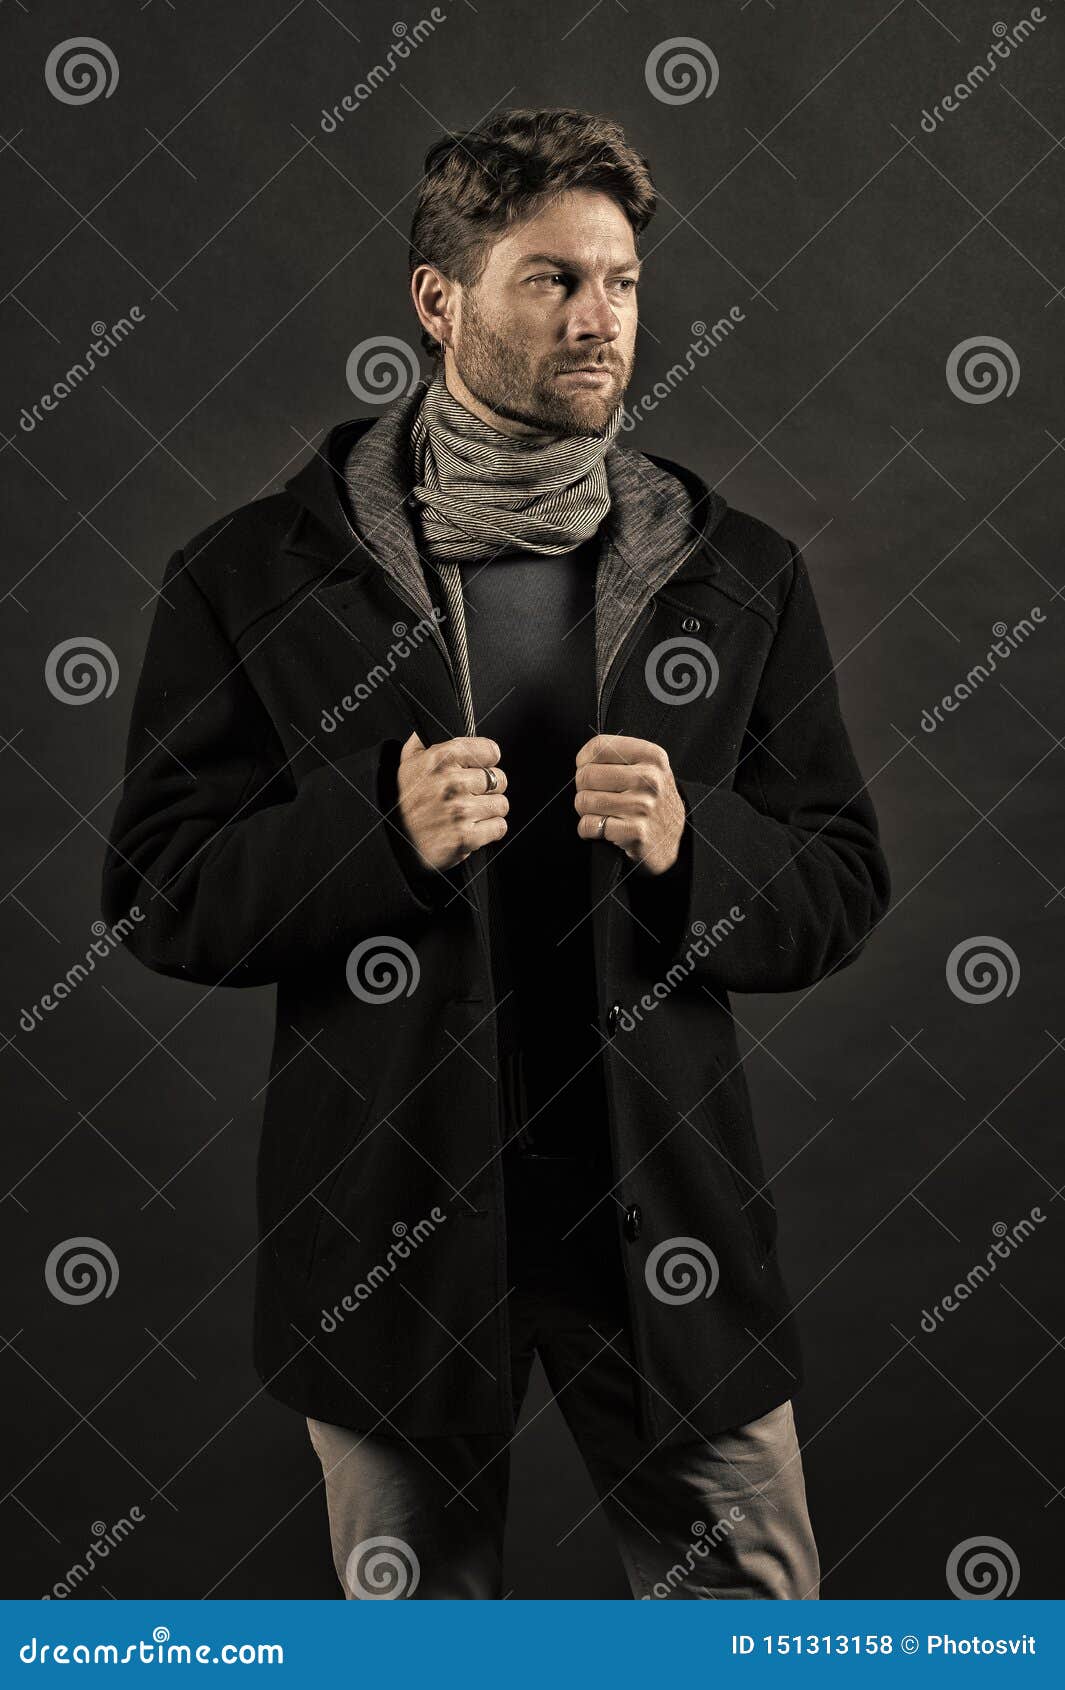 Suited Man Trench Coat Posing Stock Photo 741817822 | Shutterstock